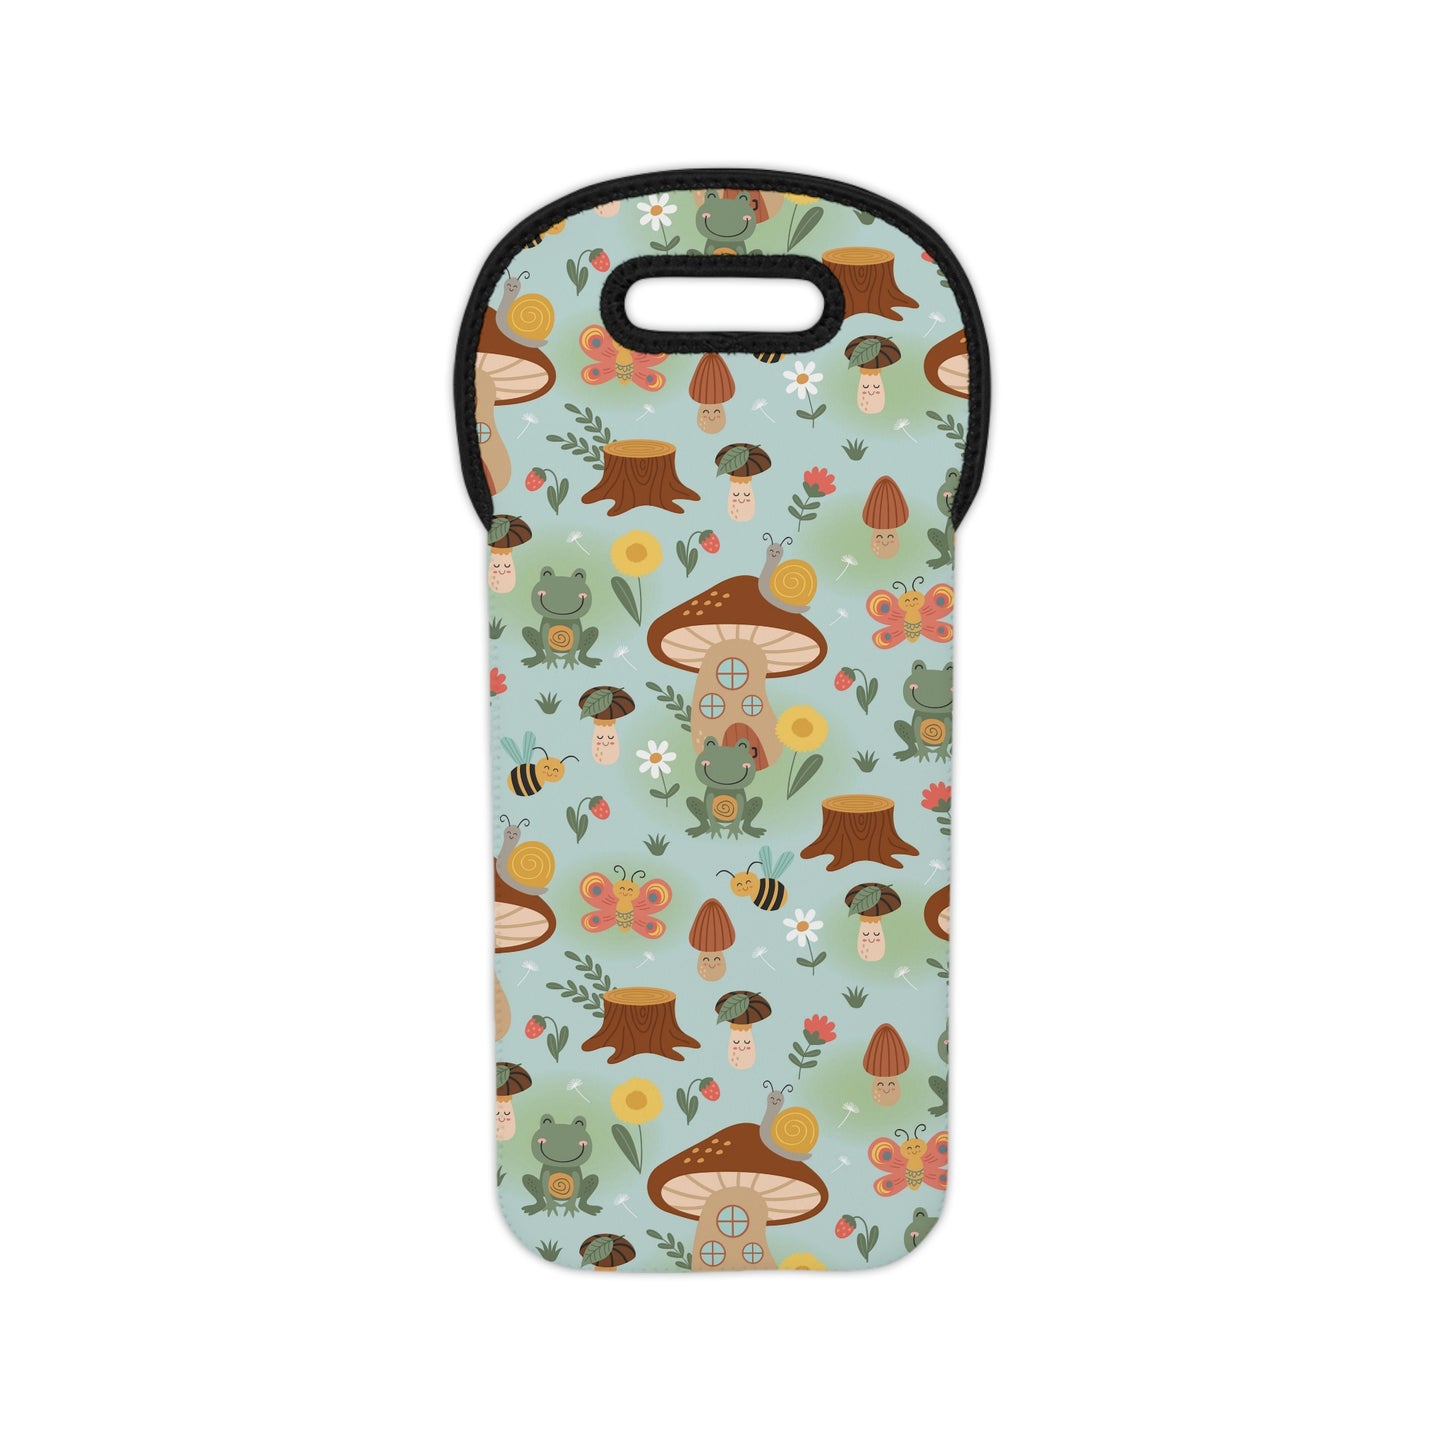 Frogs and Mushrooms Wine Tote Bag